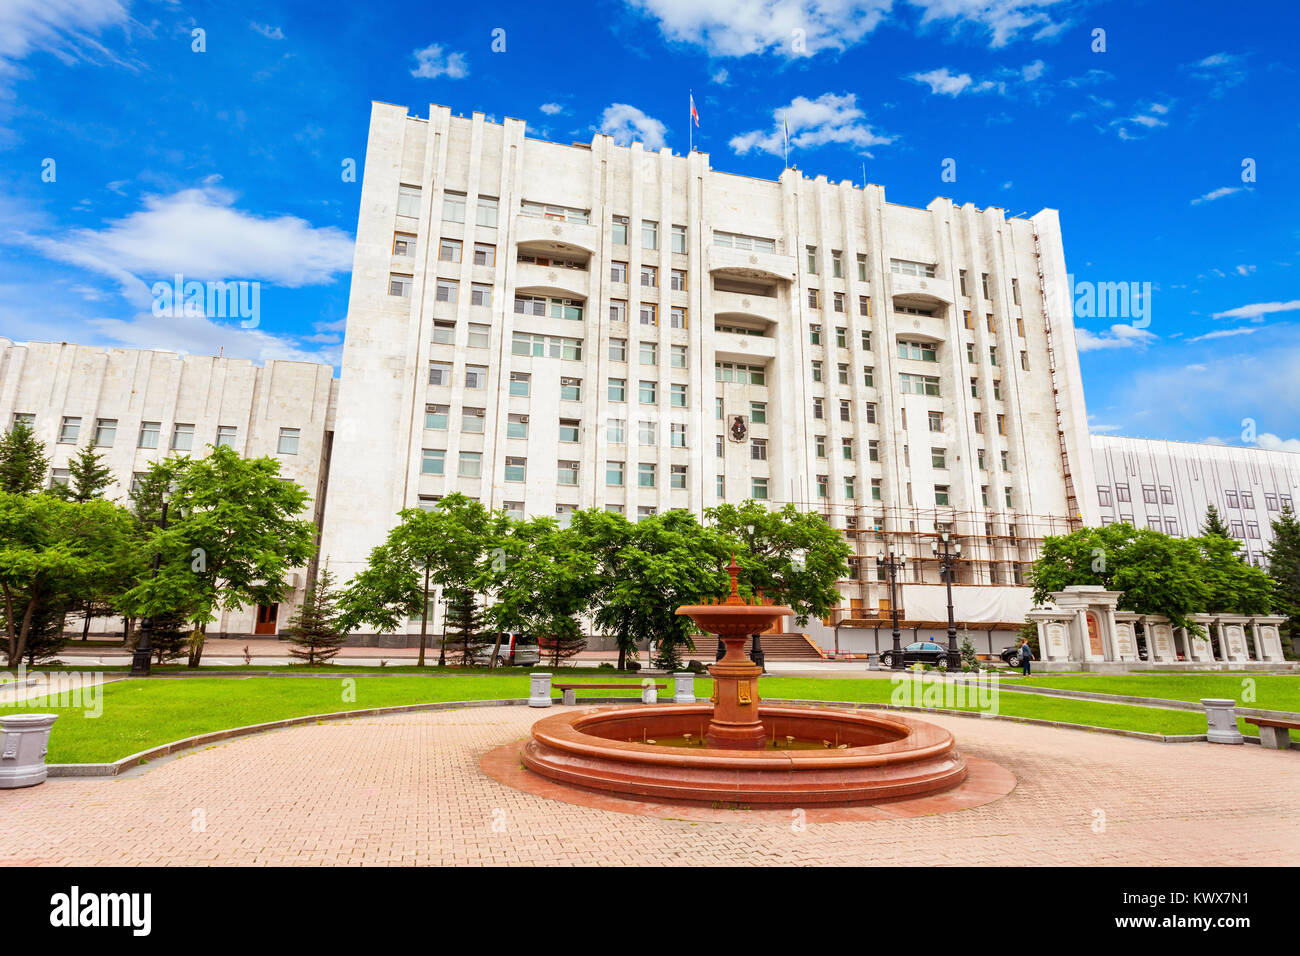 Building of Khabarovsk Krai government in the center of Khabarovsk city, Russia Stock Photo